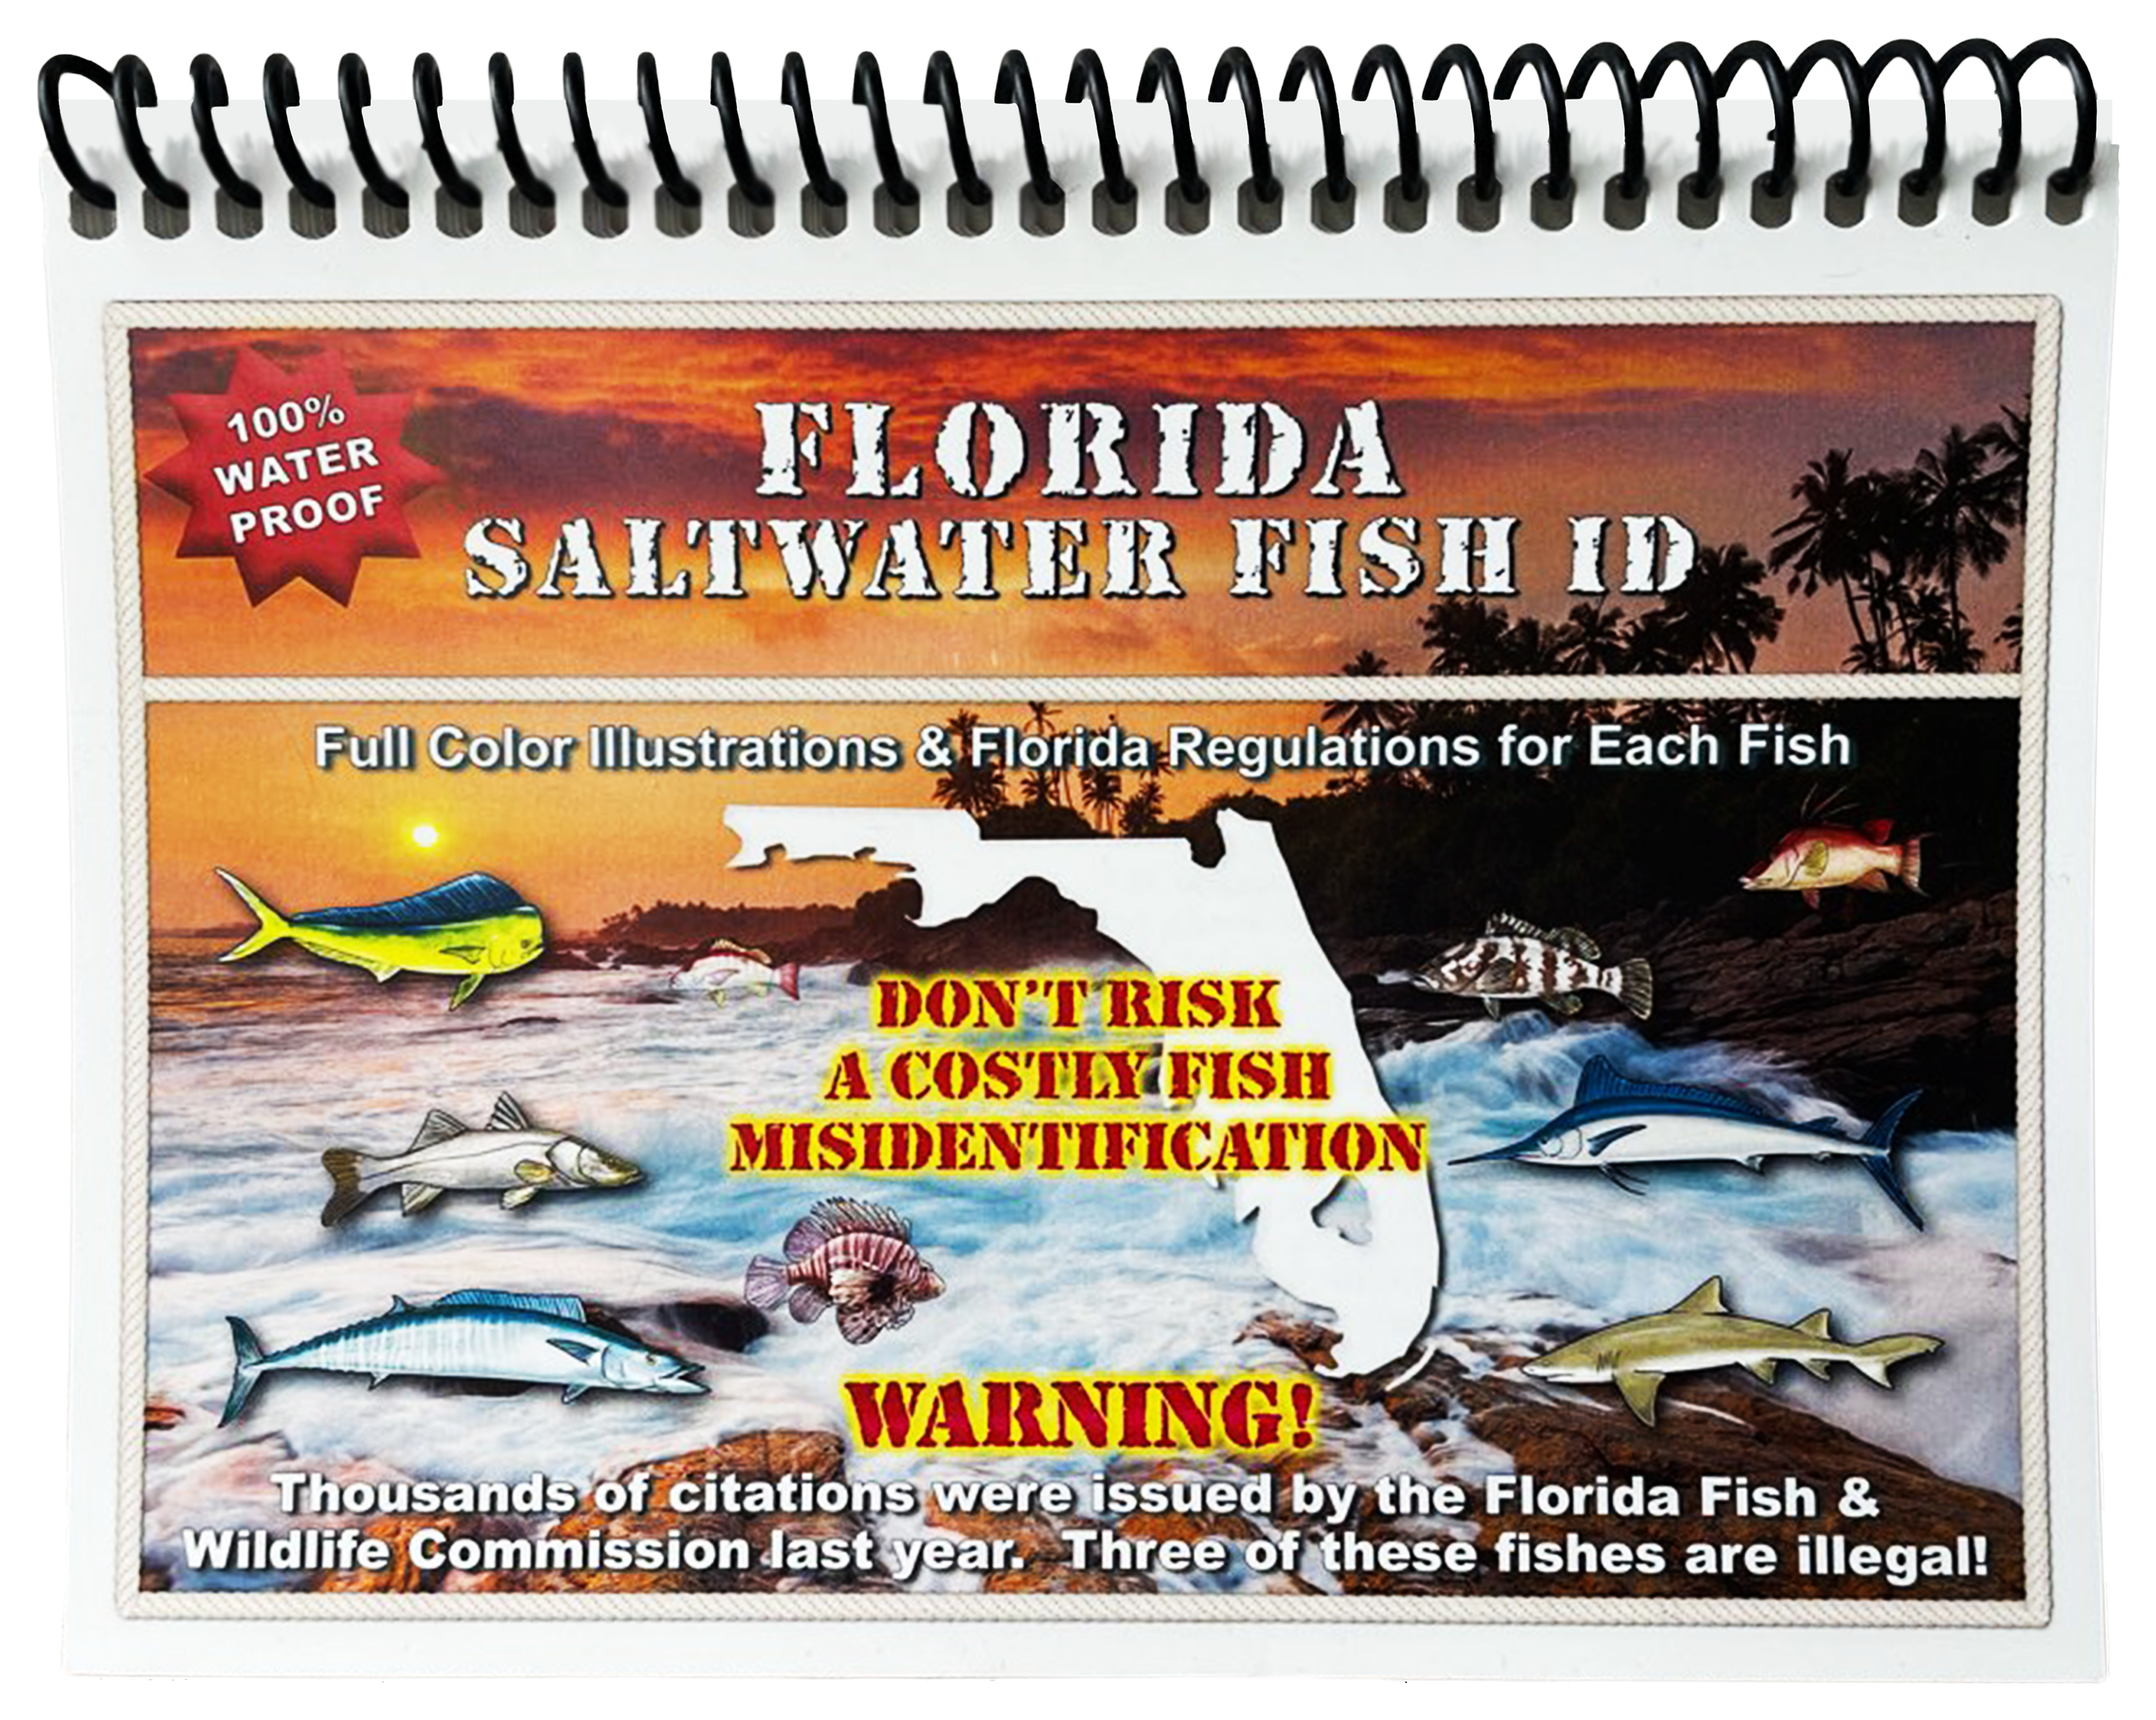 Fish Florida Saltwater: Better Than Luck--The Foolproof Guide to Florida Saltwater Fishing [Book]